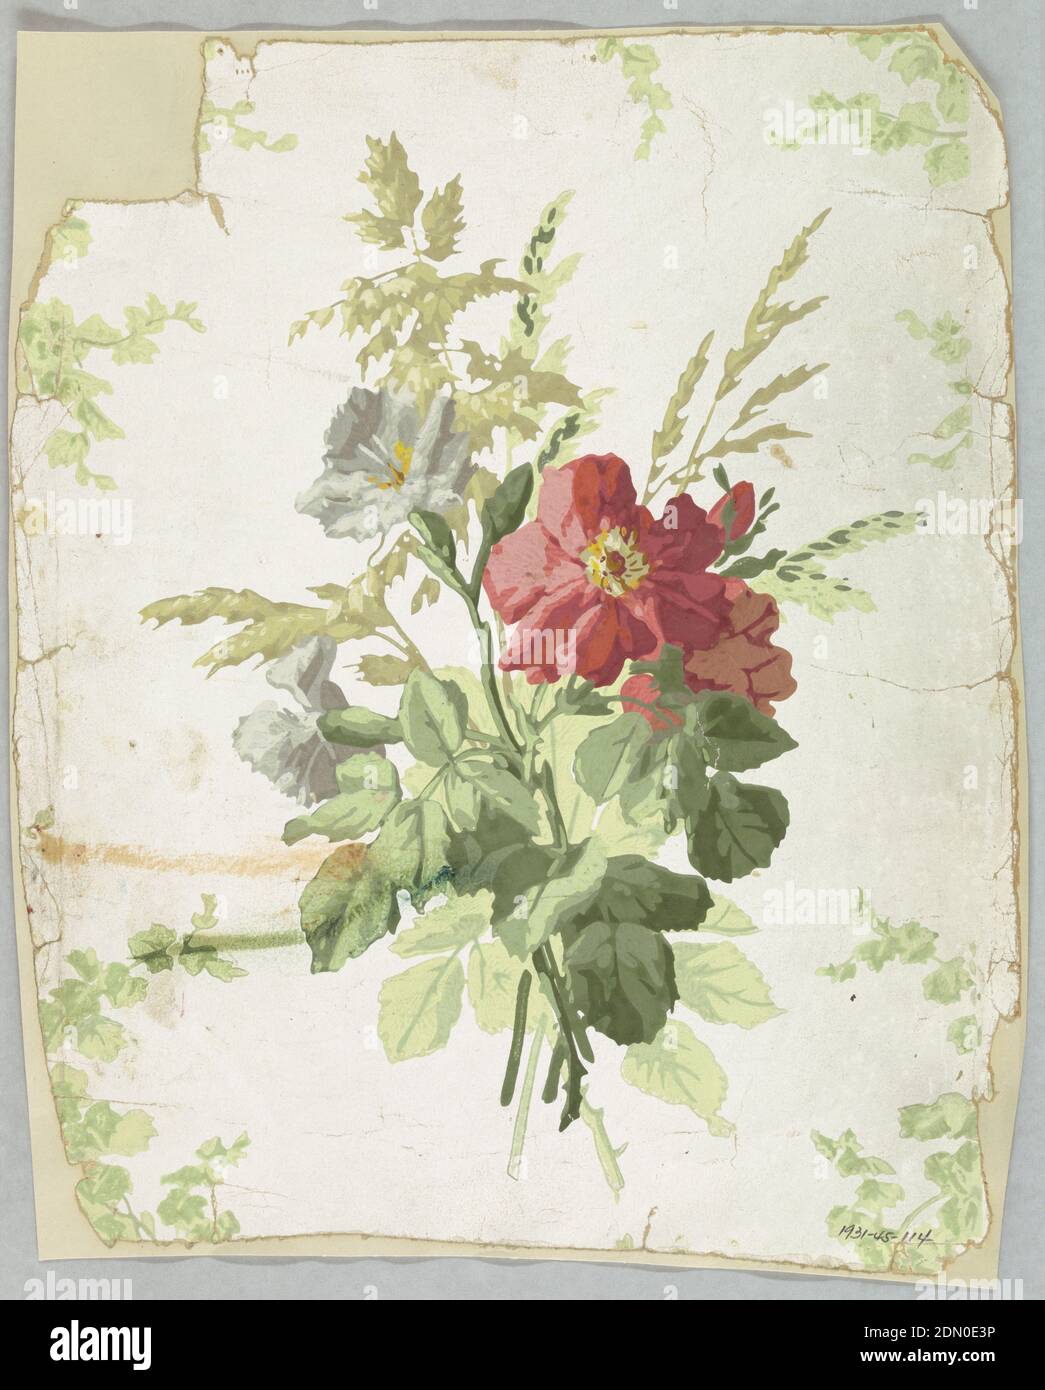 Sidewall, Block-printed on satin ground, Bouquet of flowers: red roses, blue-gray carnations with green leaves, and yellow-green field grasses. Printed in colors on white satin ground., USA, 1850–60, Wallcoverings, Sidewall Stock Photo